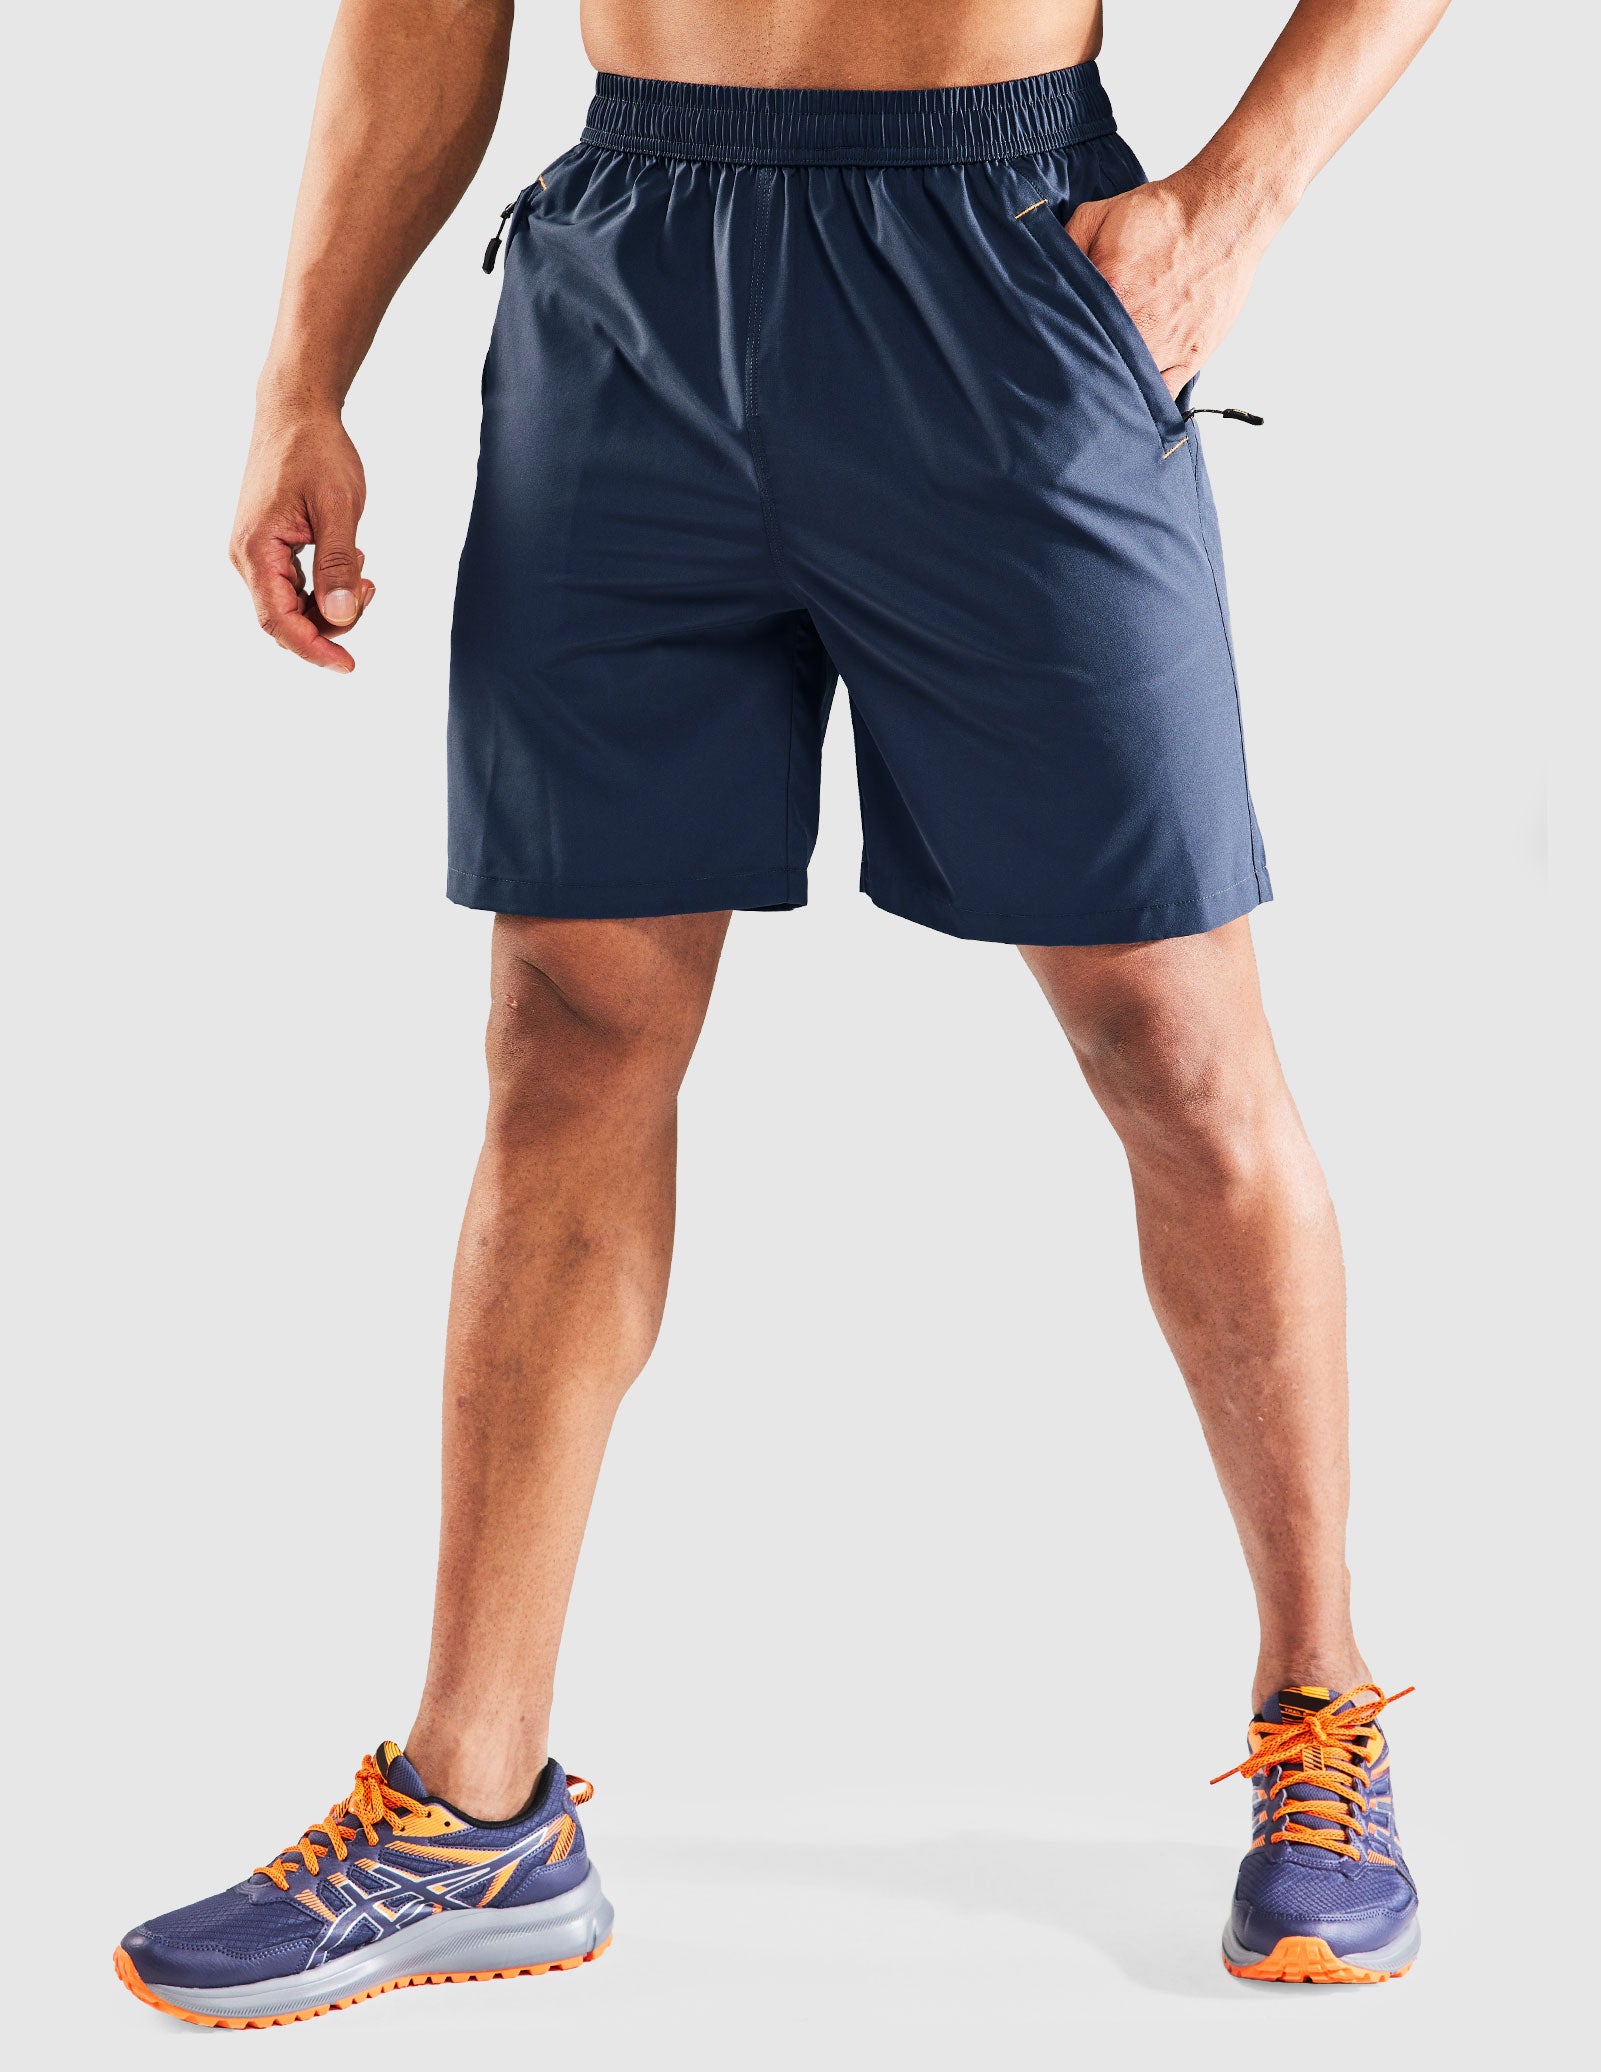 Men's Quick Dry Running Shorts with Zipper Pocket 7 Inch